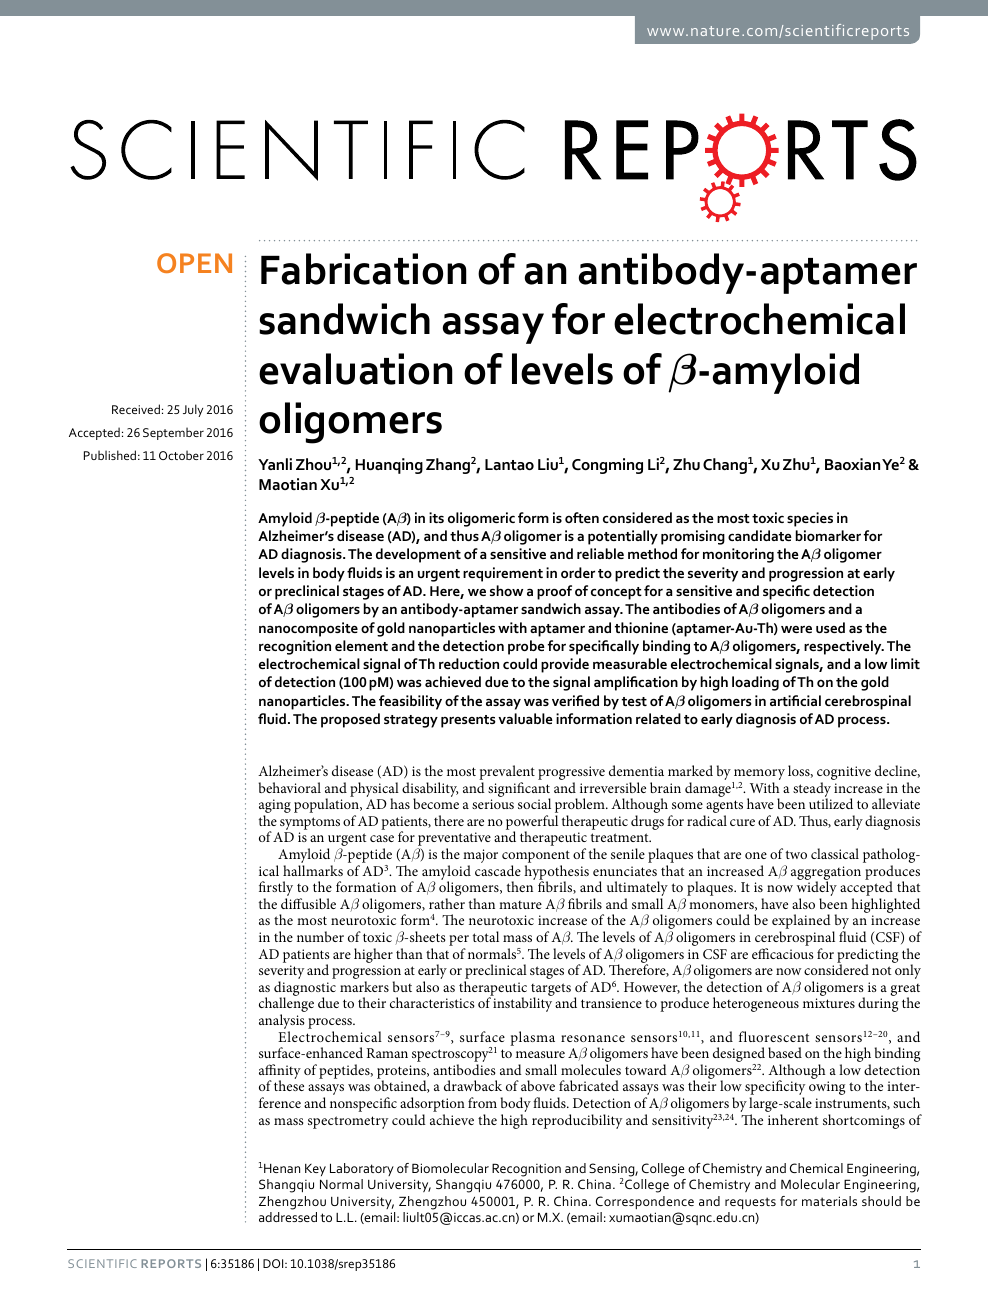 Fabrication Of An Antibody Aptamer Sandwich Assay For Electrochemical Evaluation Of Levels Of B Amyloid Oligomers Topic Of Research Paper In Nano Technology Download Scholarly Article Pdf And Read For Free On Cyberleninka Open